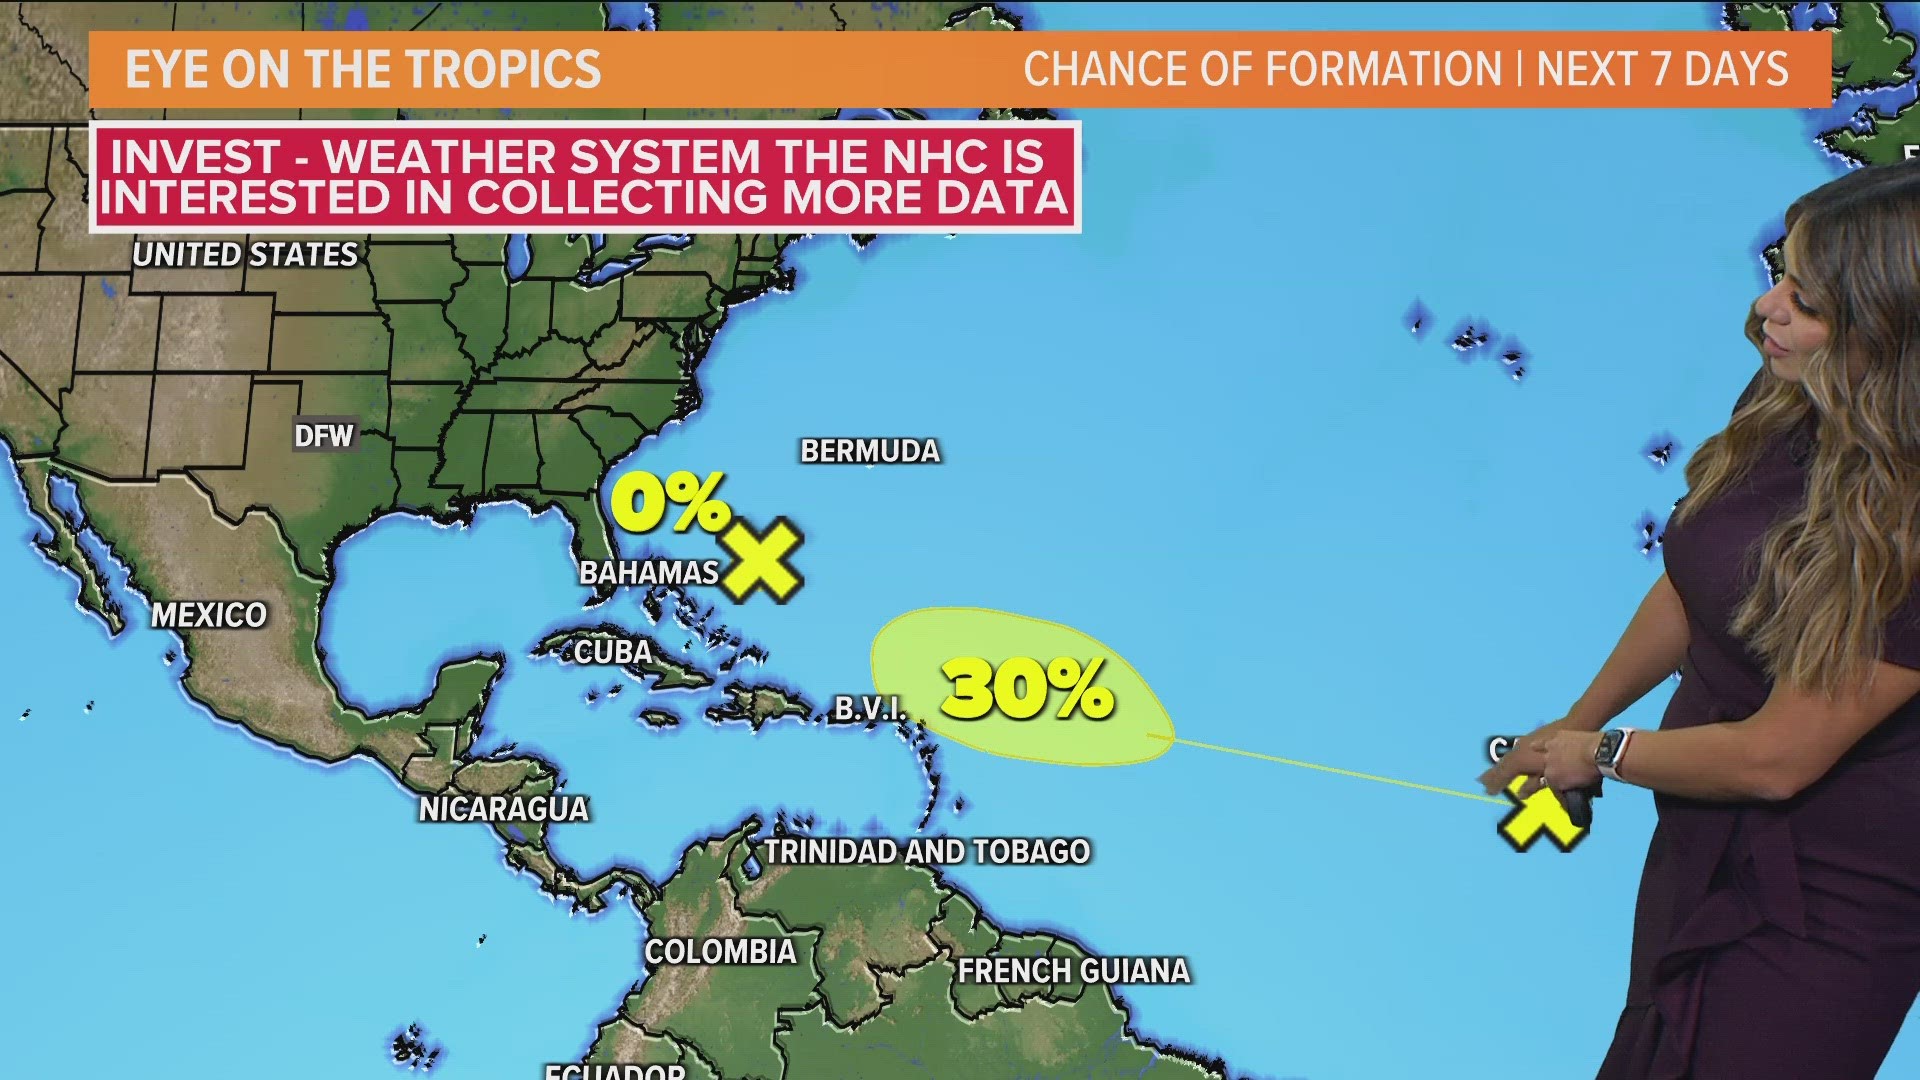 Mariel Ruiz has an early look at the tropics and what the warm Gulf of Mexico water could mean.